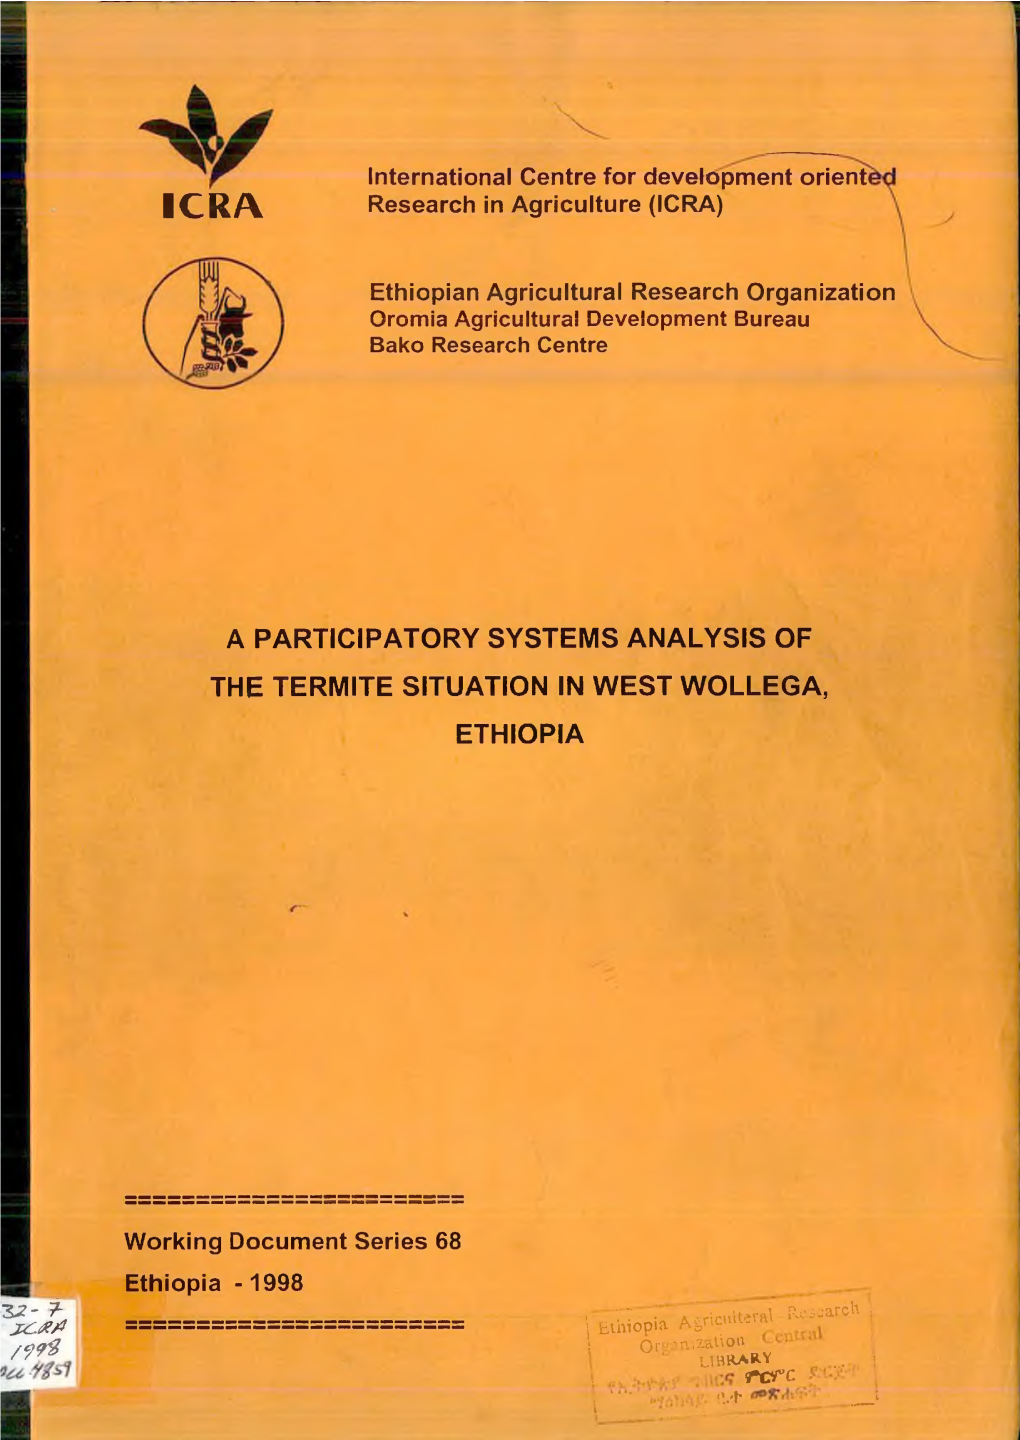 A Participatory Systems Analysis of the Termite Situation in West Wollega, Ethiopia